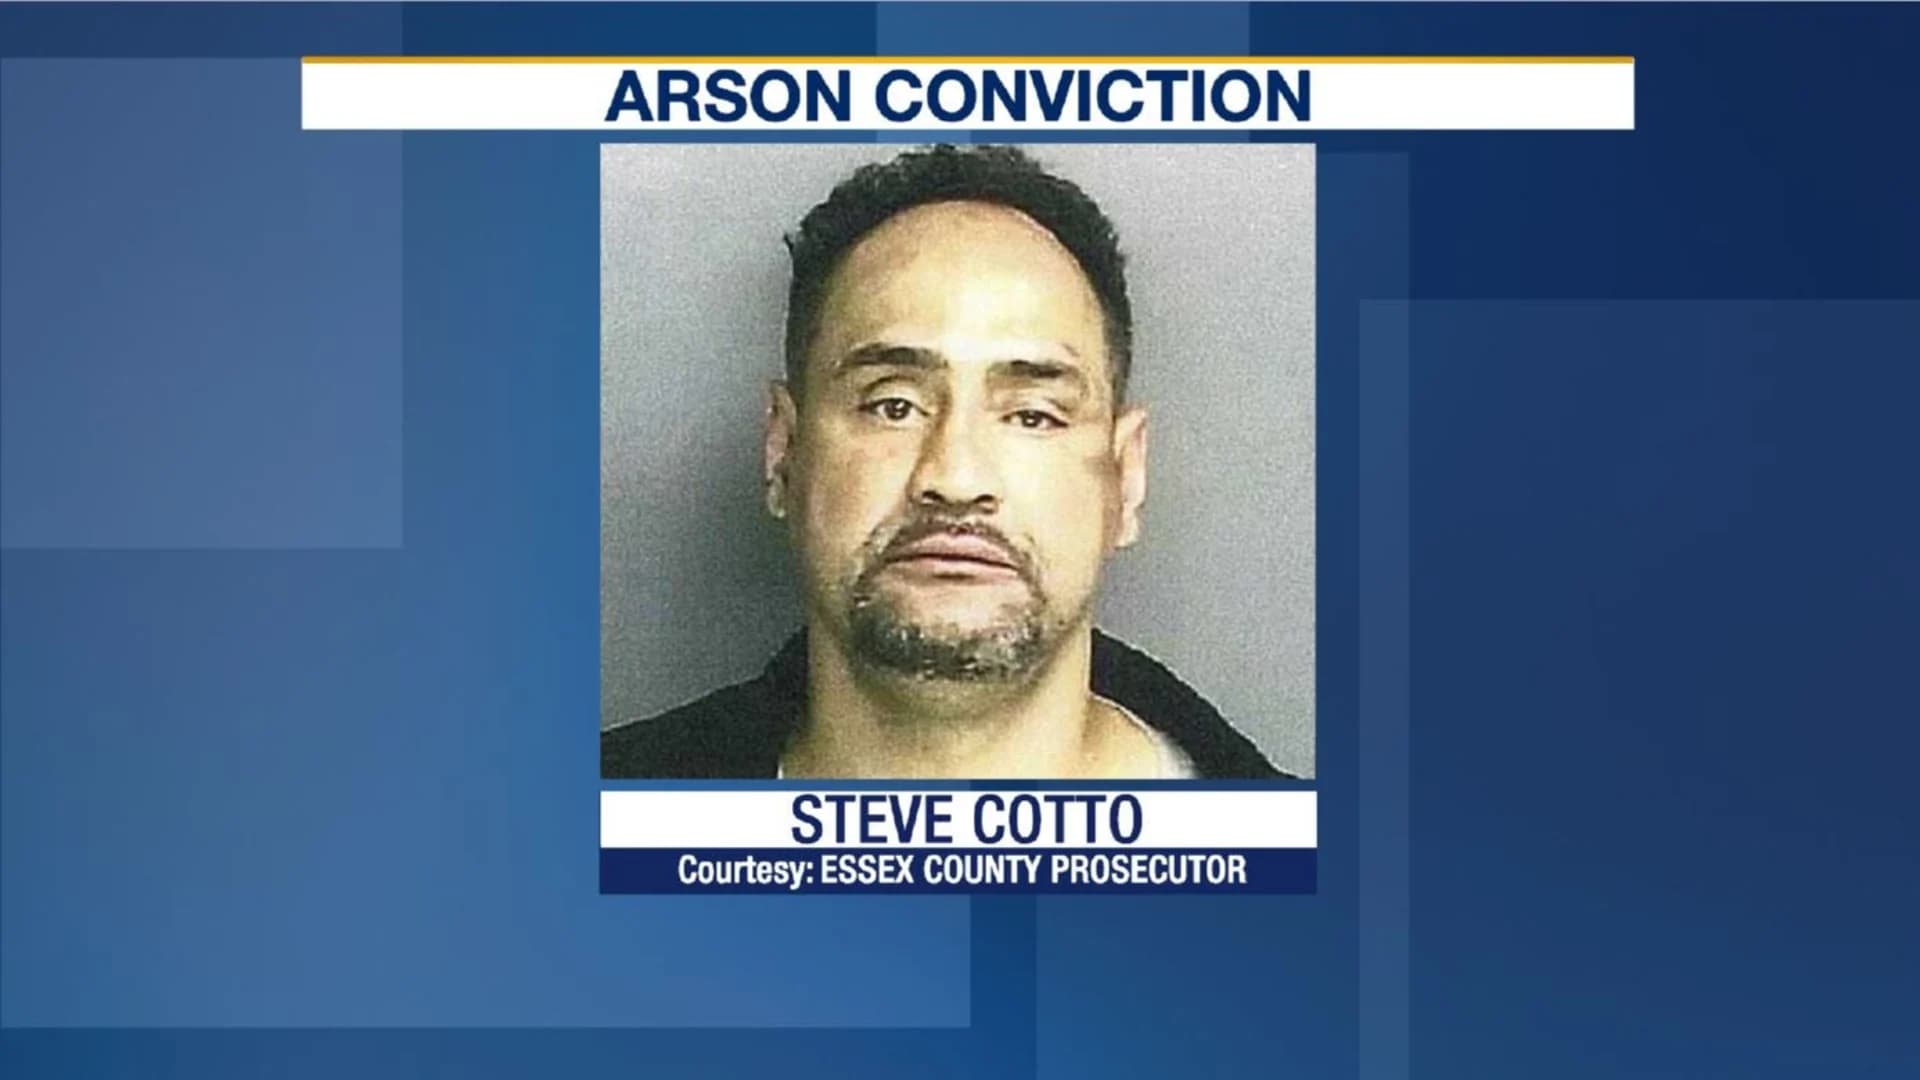 Man found guilty of setting fire at strip club that 'robbed' him